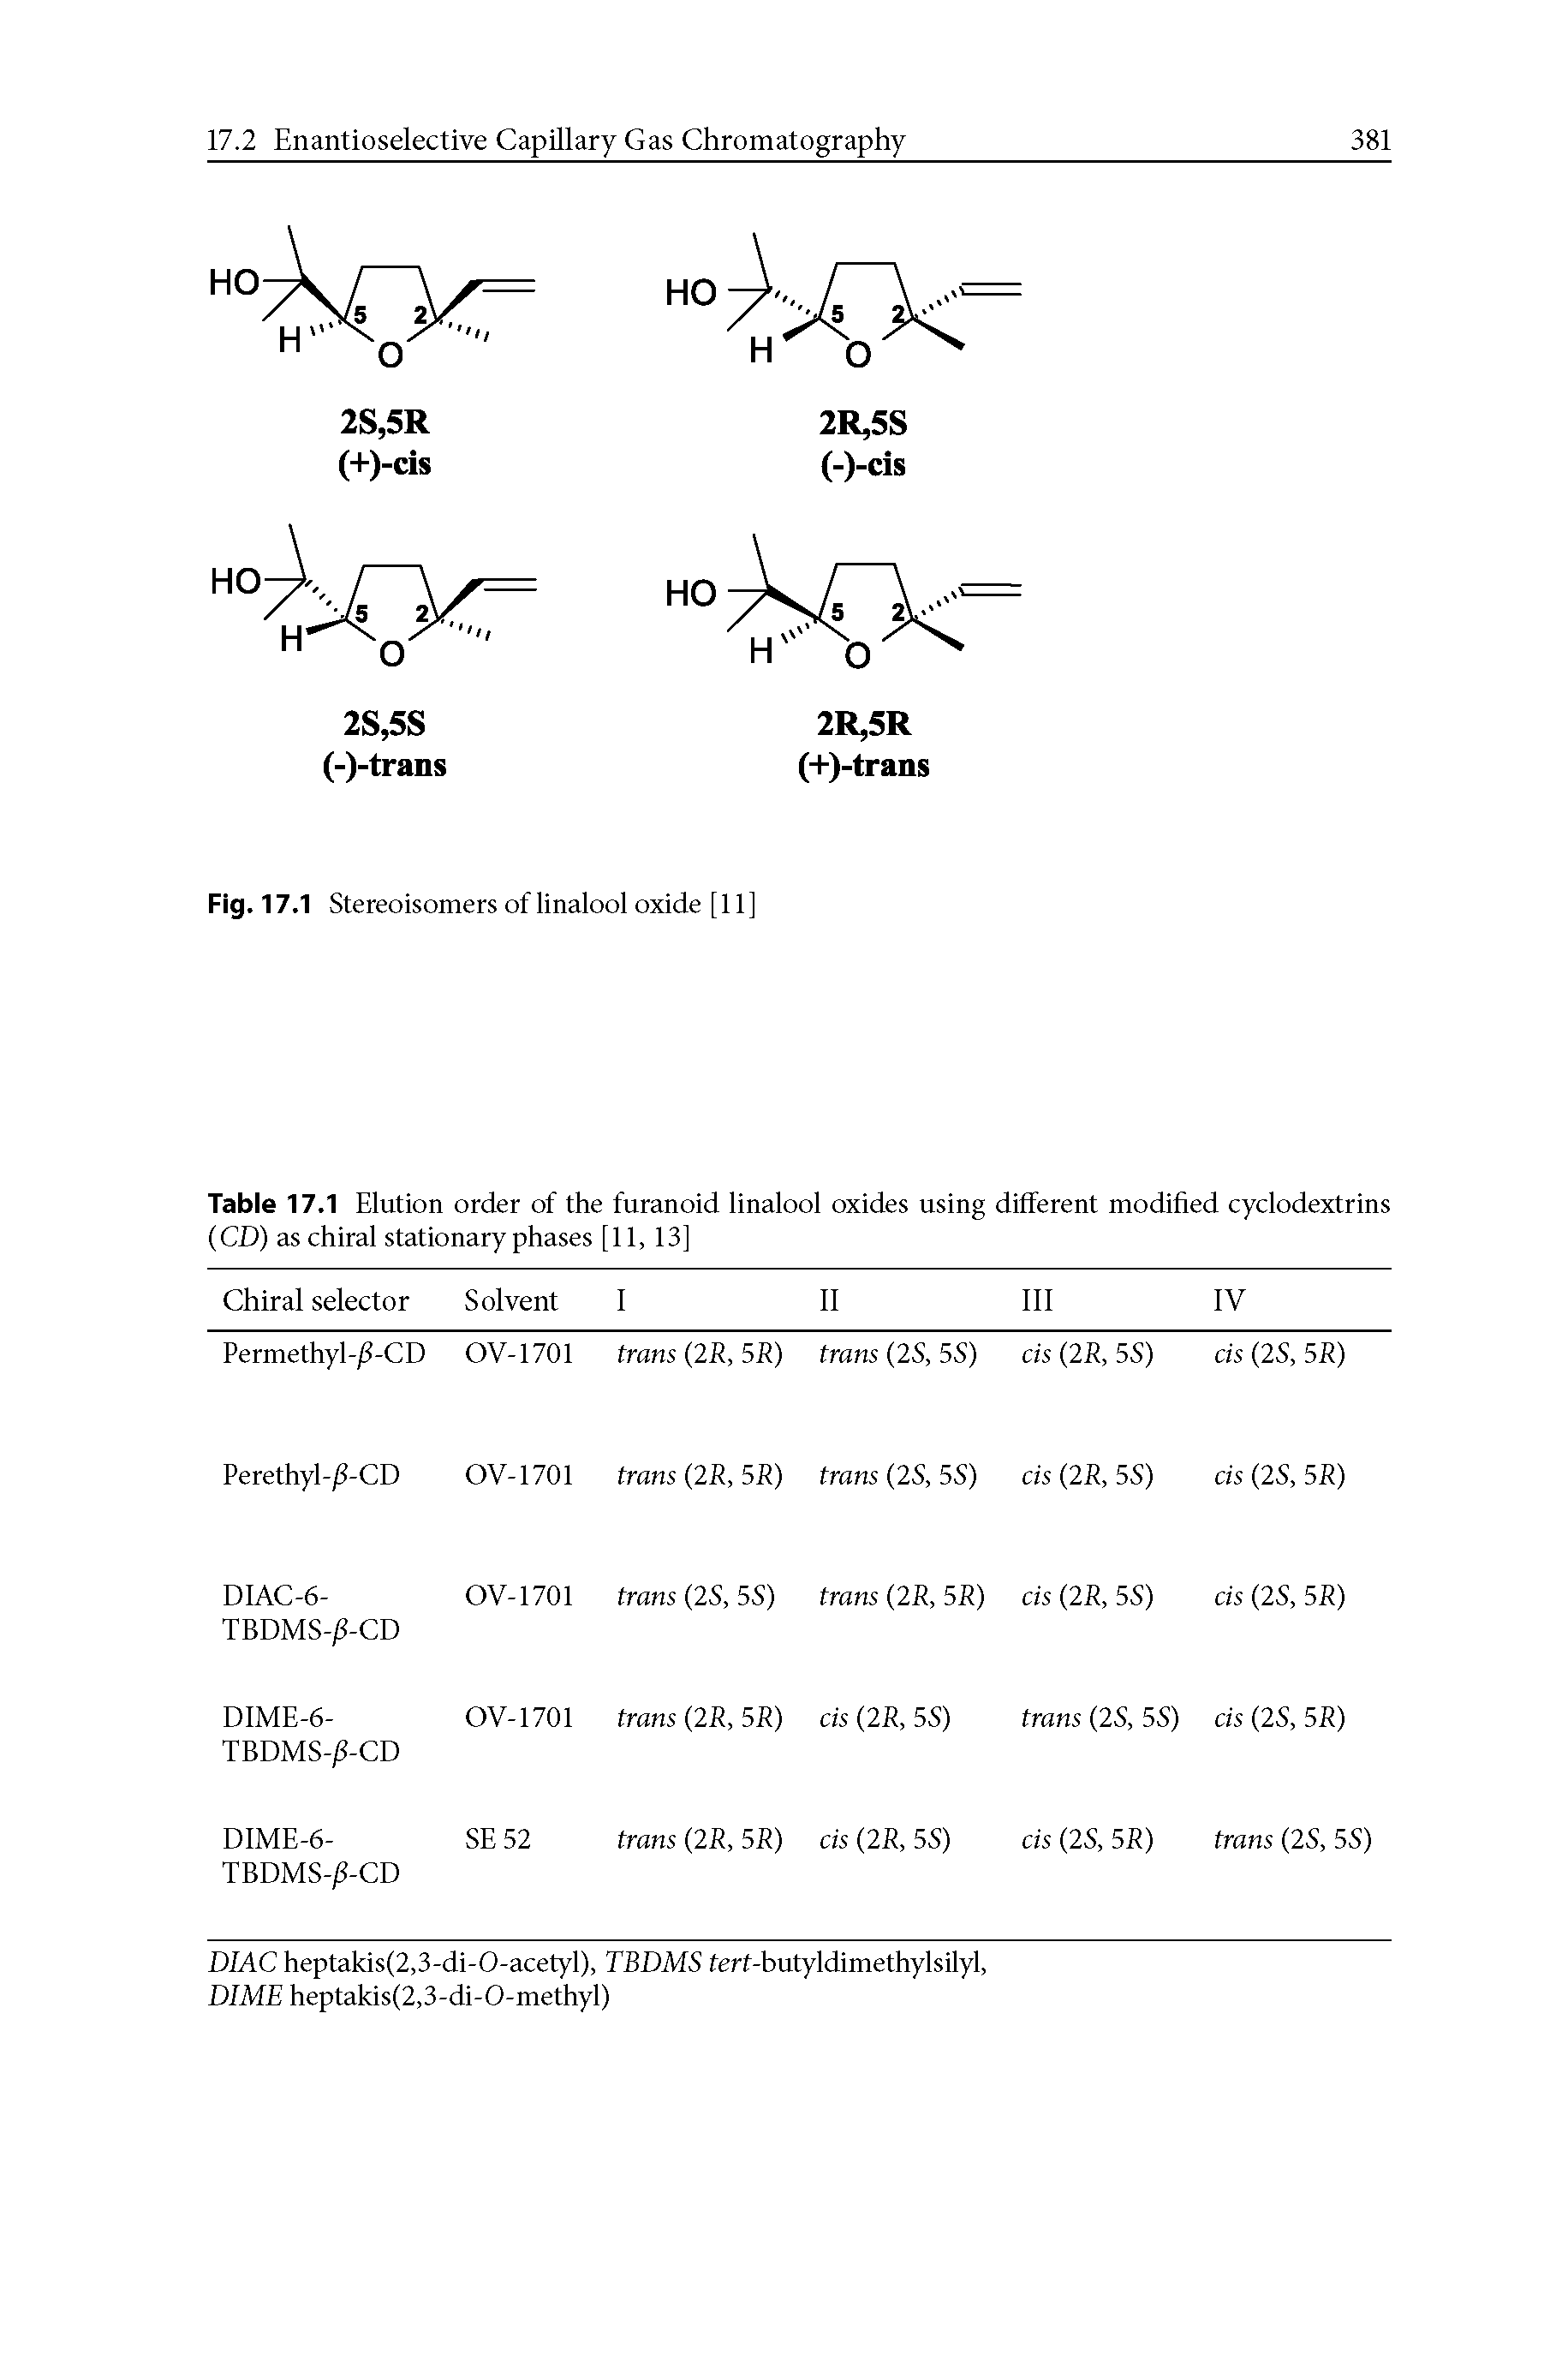 Table 17.1 Elution order of the furanoid linalool oxides using different modified cyclodextrins (CD) as chiral stationary phases [11, 13]...